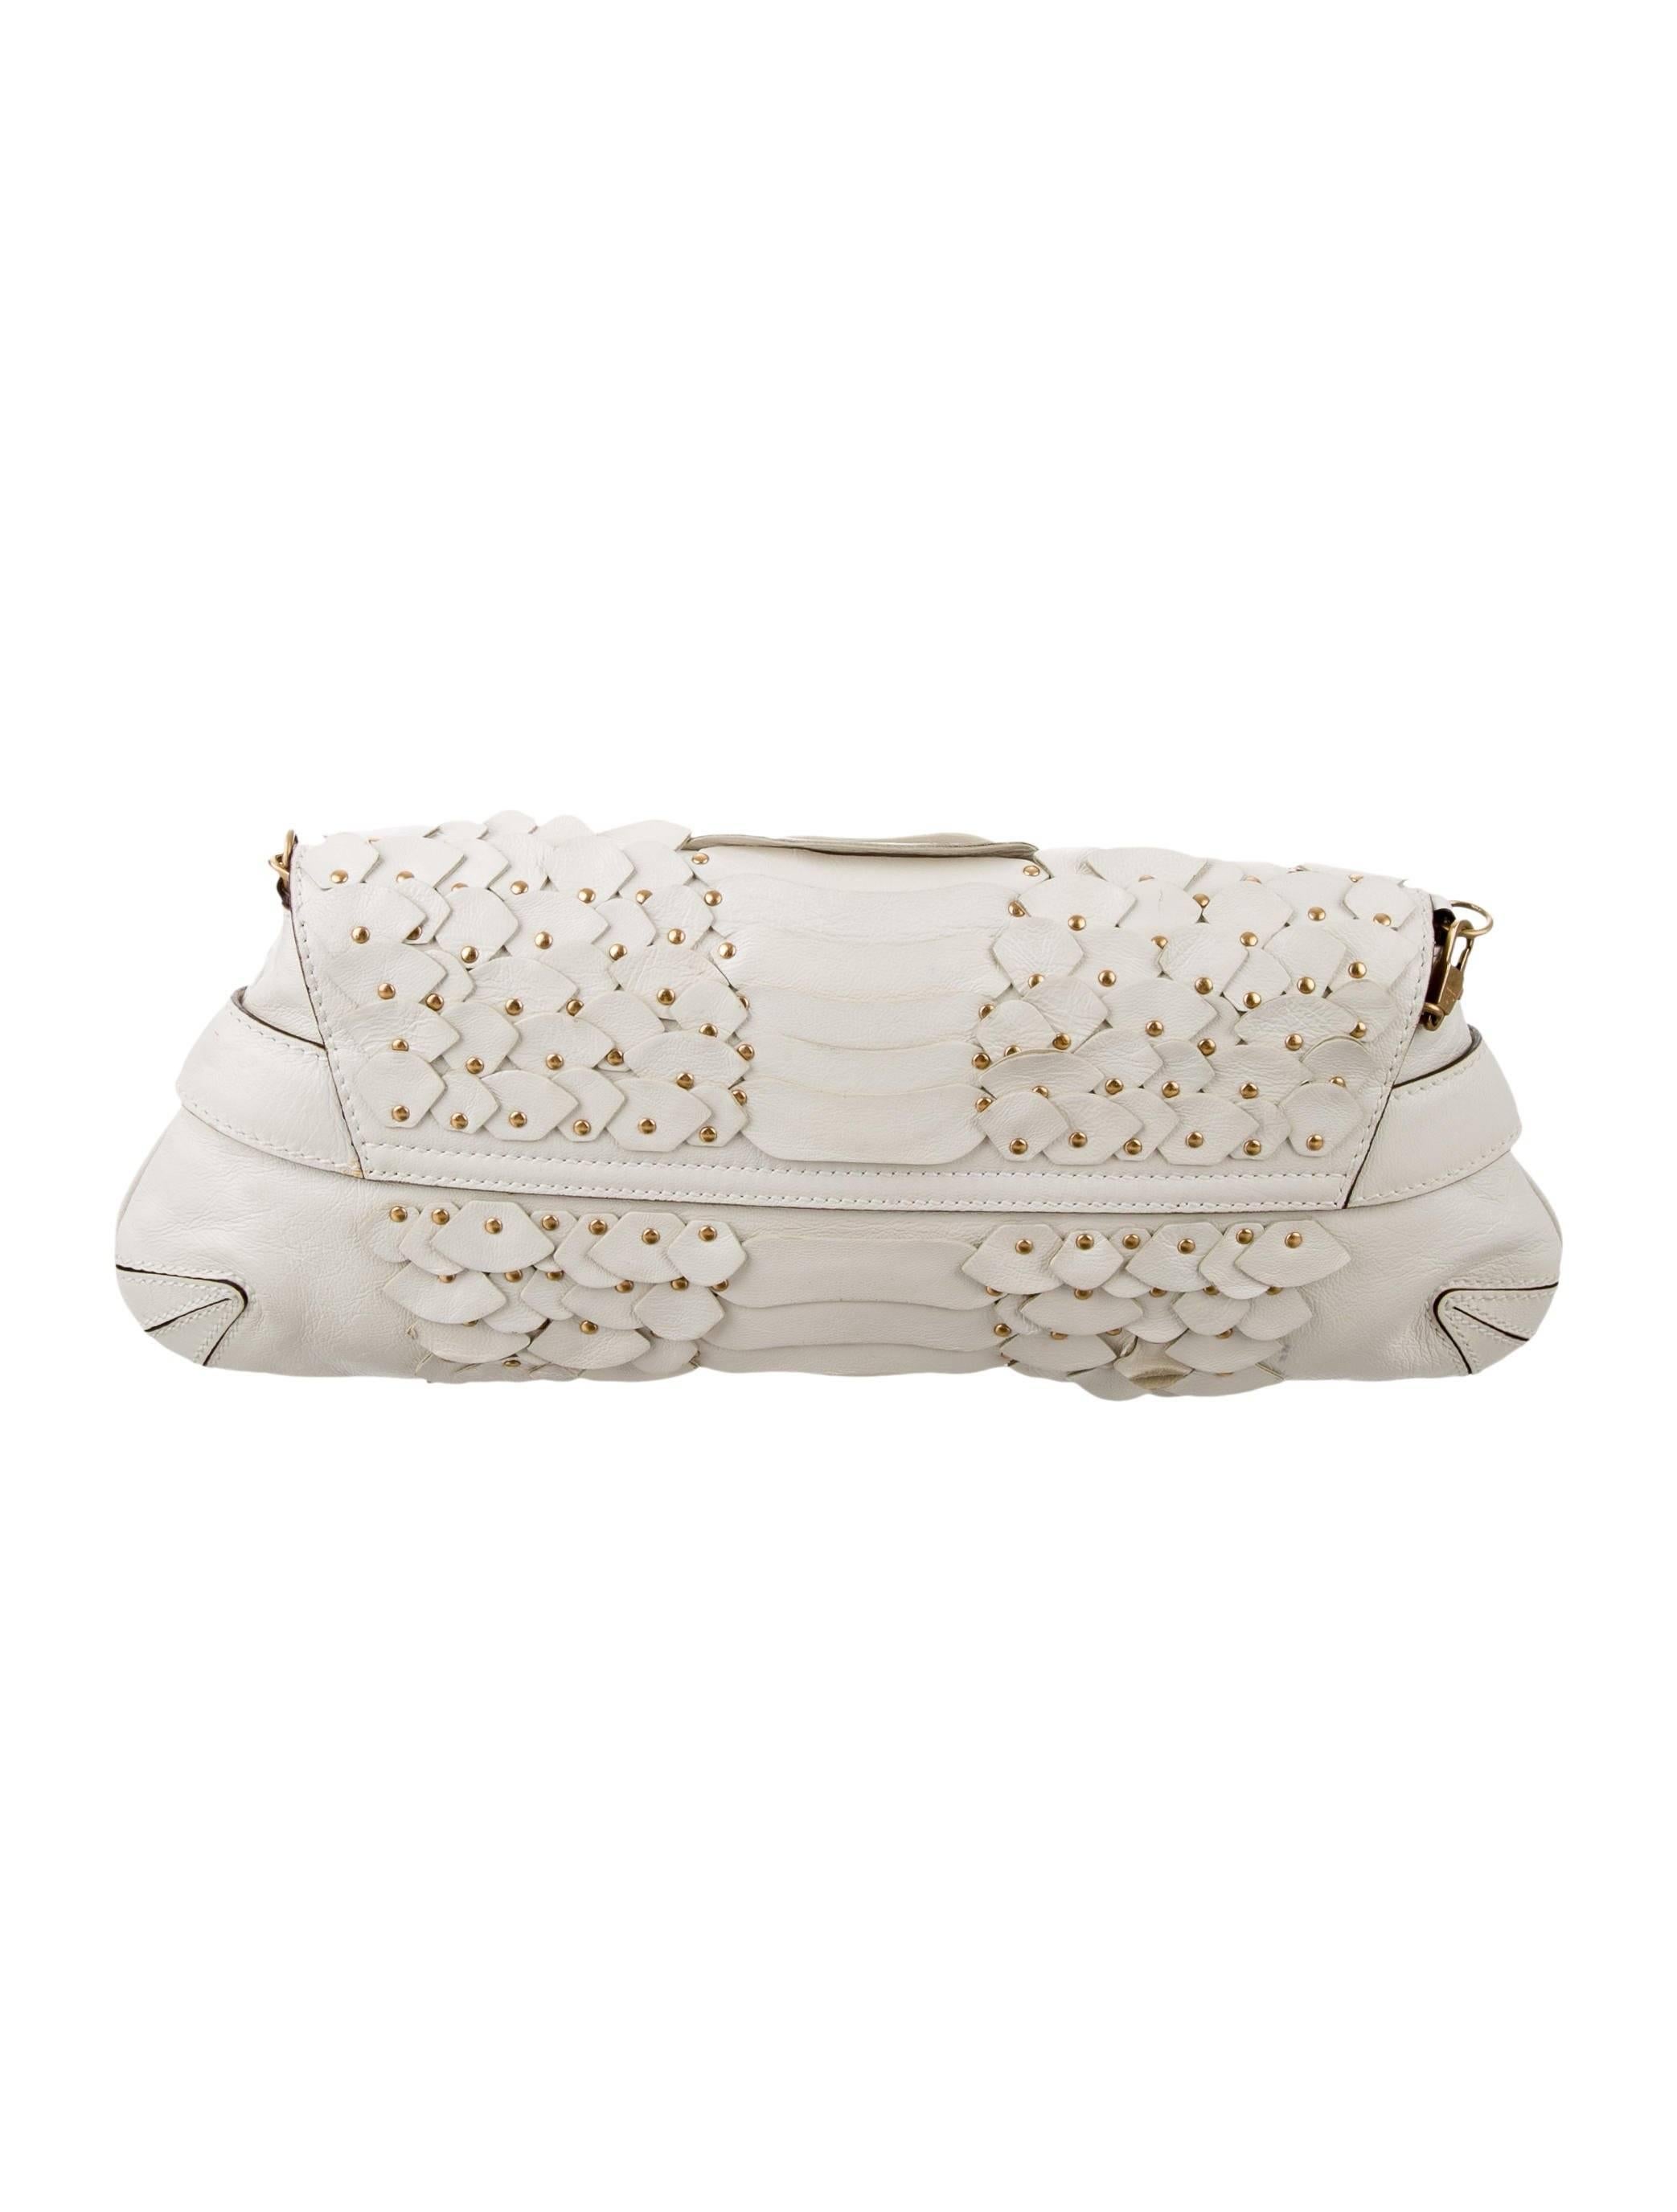 Tom Ford for Gucci White Leather Bag Fall 2003 In Excellent Condition In Brisbane, Queensland